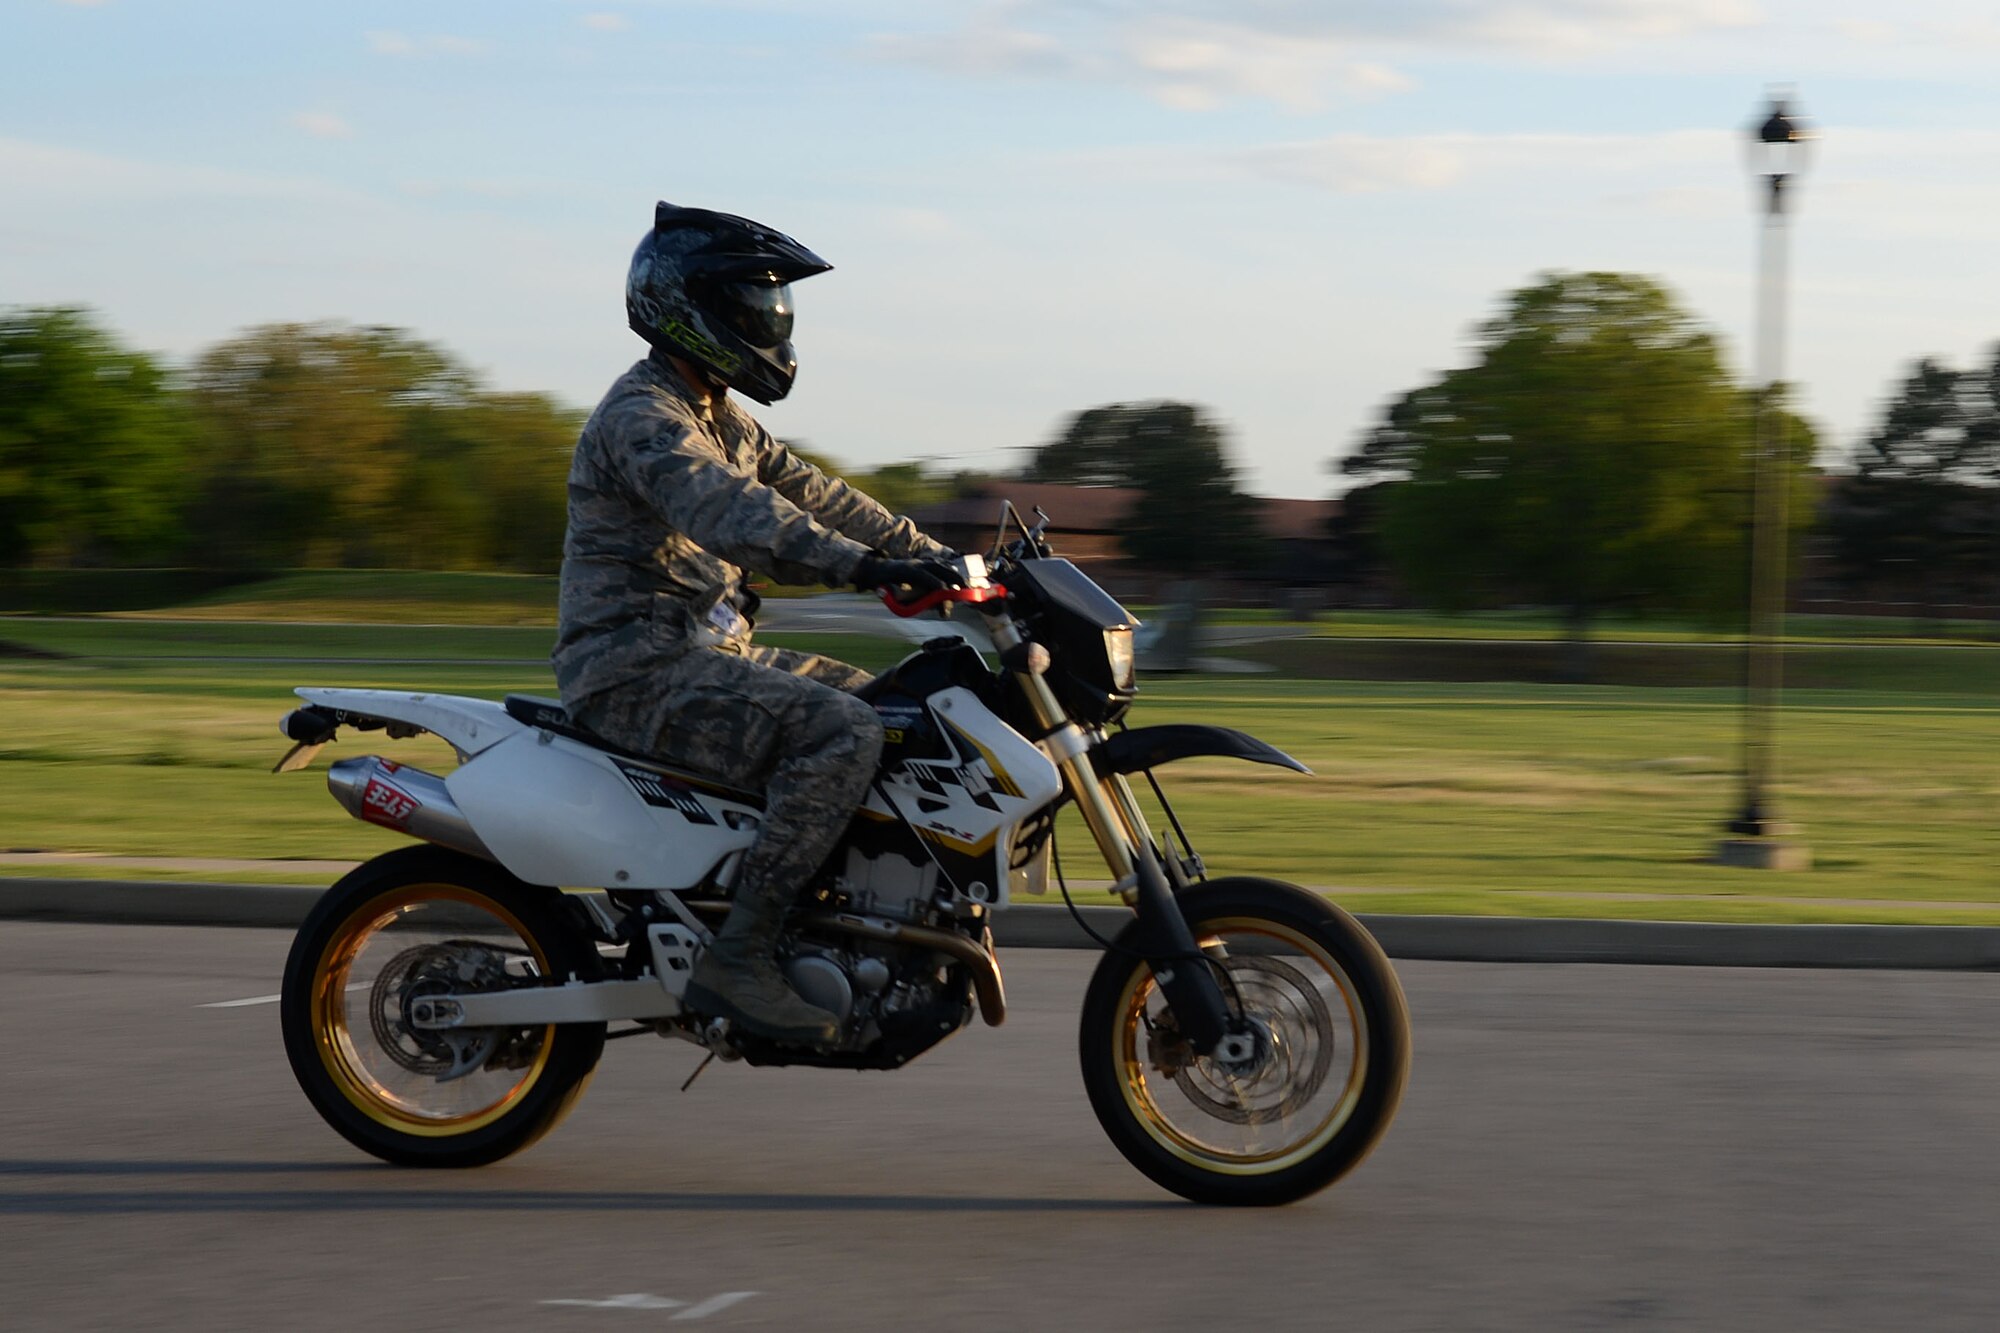 U.S. Air Force Airman 1st Class Omar Campos, 19th Maintenance Squadron crew chief, rides his bike April 5, 2017, at Little Rock Air Force Base, Arkansas. Active duty military members who operate a motorcycle both on and off Little Rock Air Force Base and anyone operating a motorcycle on the base, including passengers, must comply with personal protective equipment requirements as prescribed in Air Force Instruction 91-207, USAF Traffic Safety Program. (U.S. Air Force photo by Airman 1st Class Codie Collins)